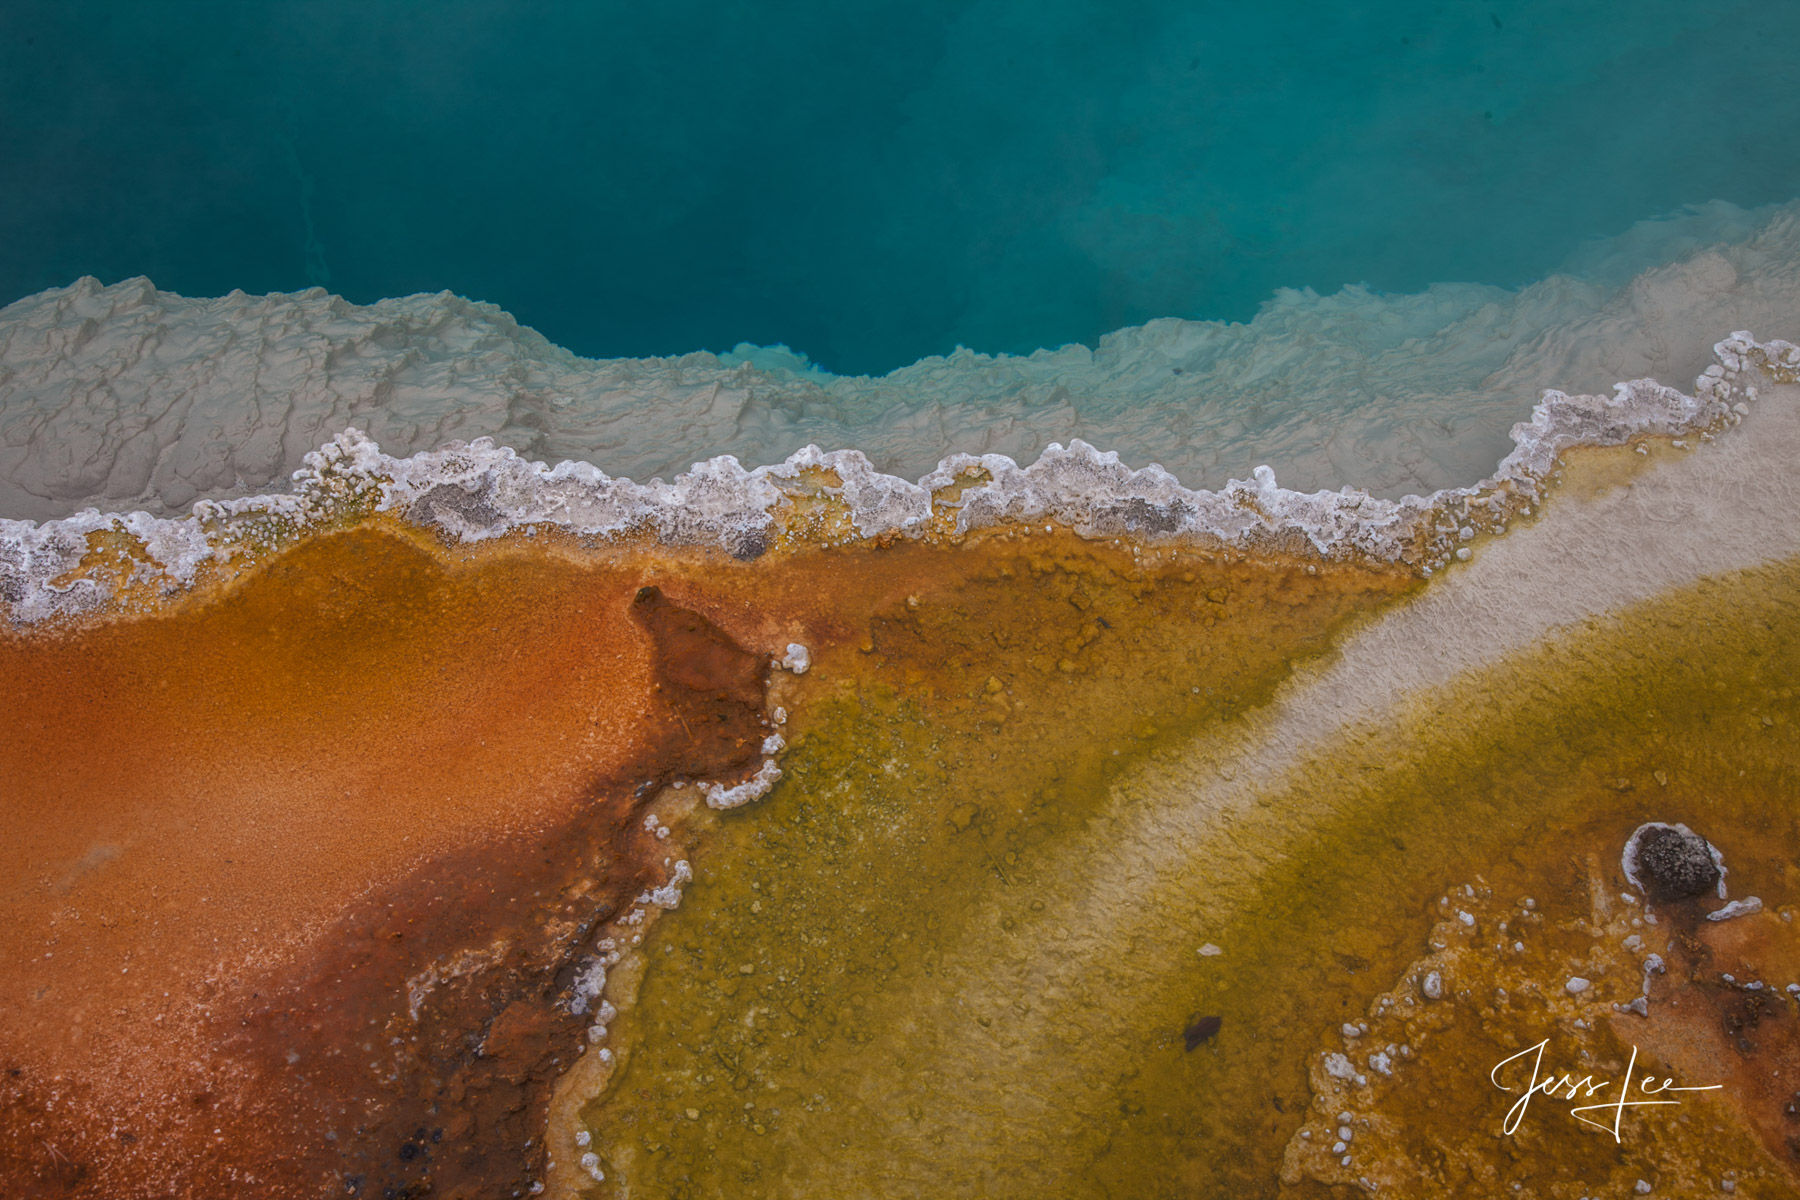 Limited Edition of 50 Exclusive high-resolution Museum Quality Fine Art Prints of Abstract Hot Springs Photography. Photos Copyright...